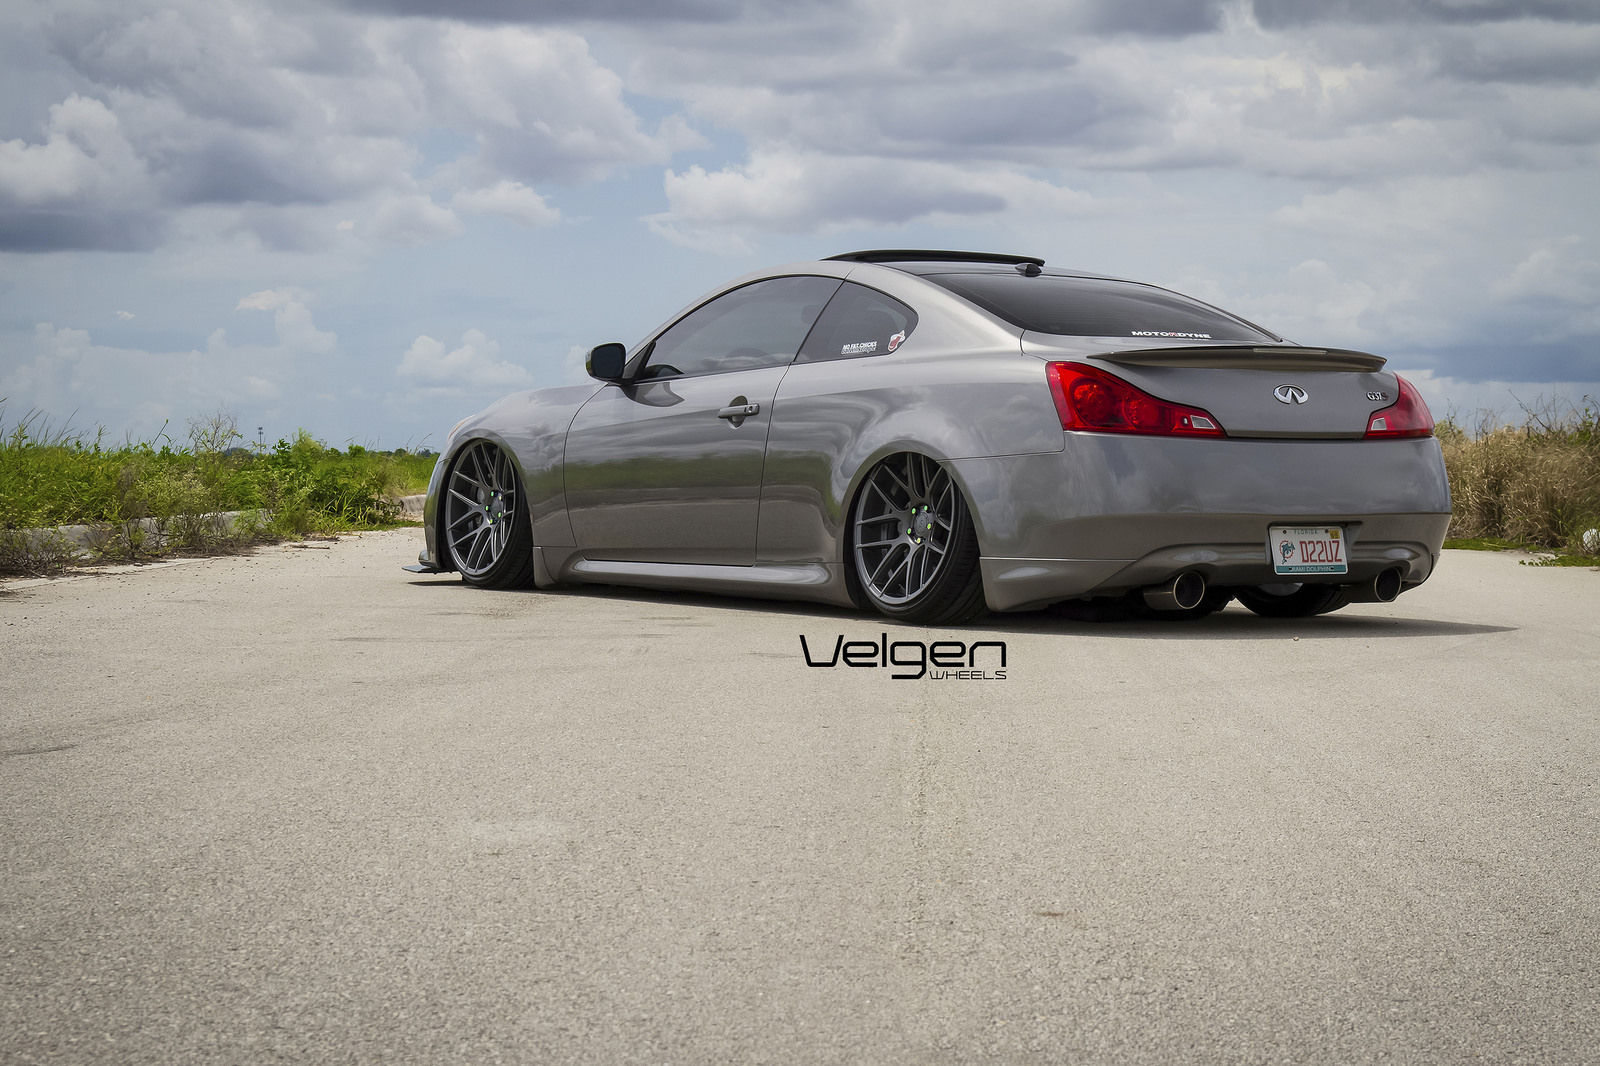 Check out Bagged Infiniti G37s on Velgen Wheels VMB7 - Lowered Stance Shot ...